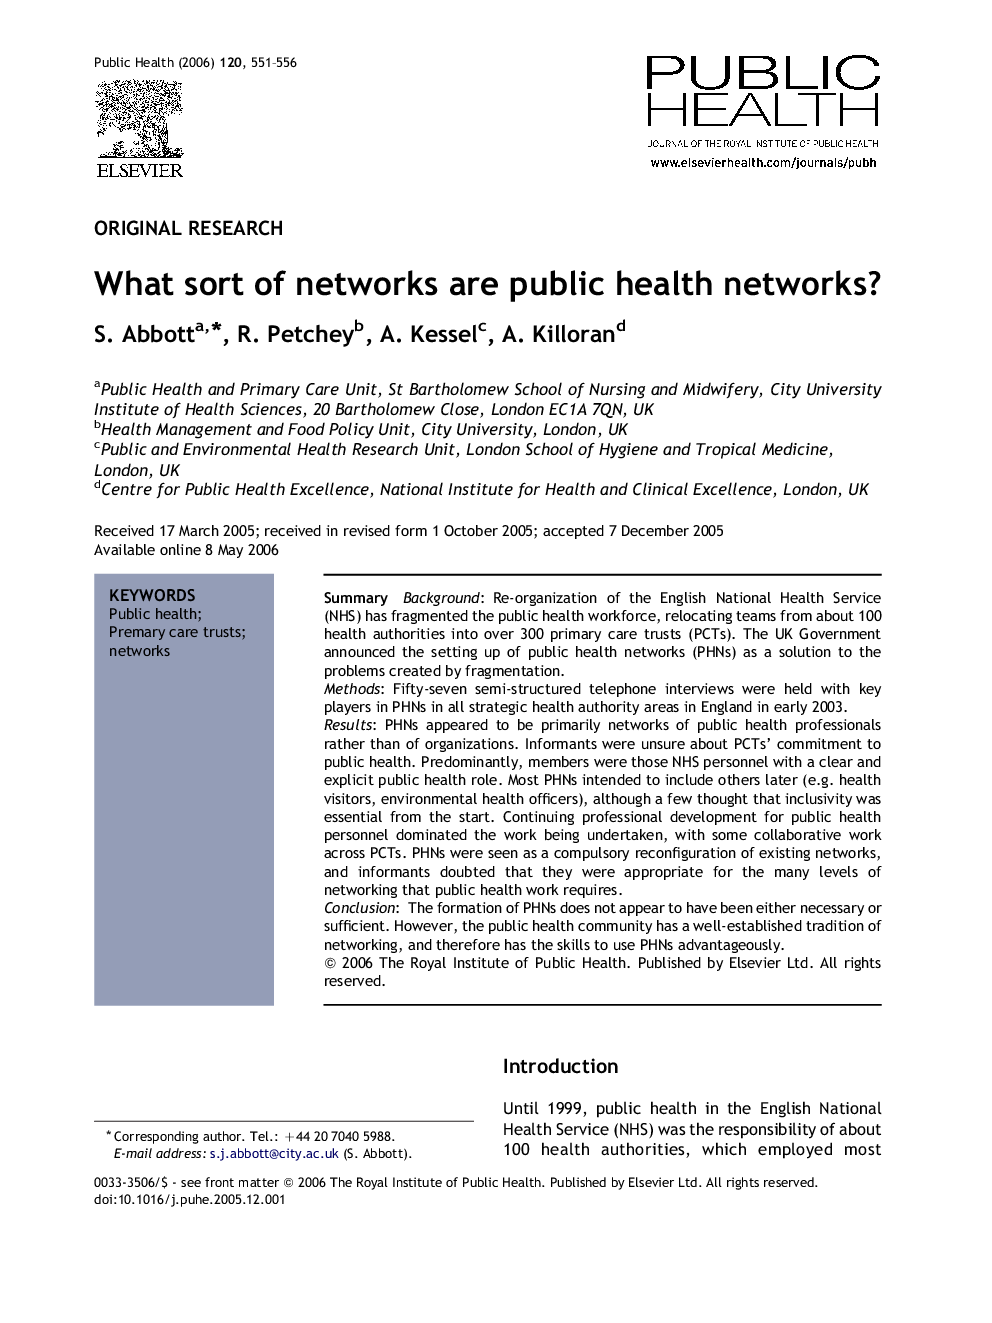 What sort of networks are public health networks?